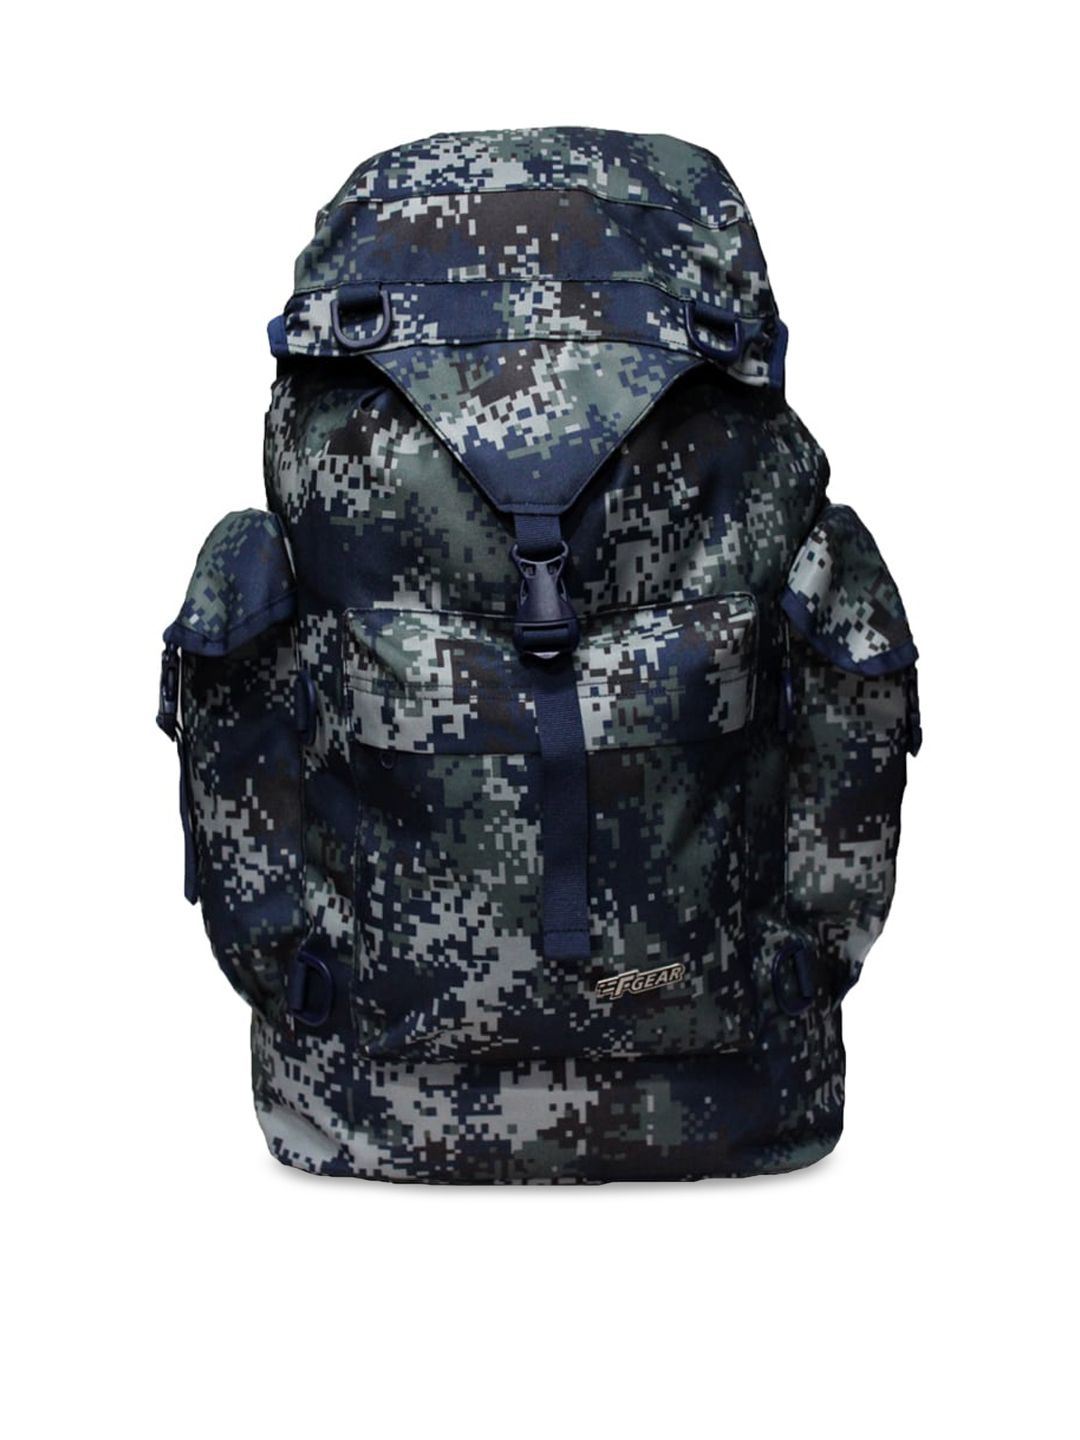 F Gear Unisex Blue & Grey Camouflage Backpacks Price in India